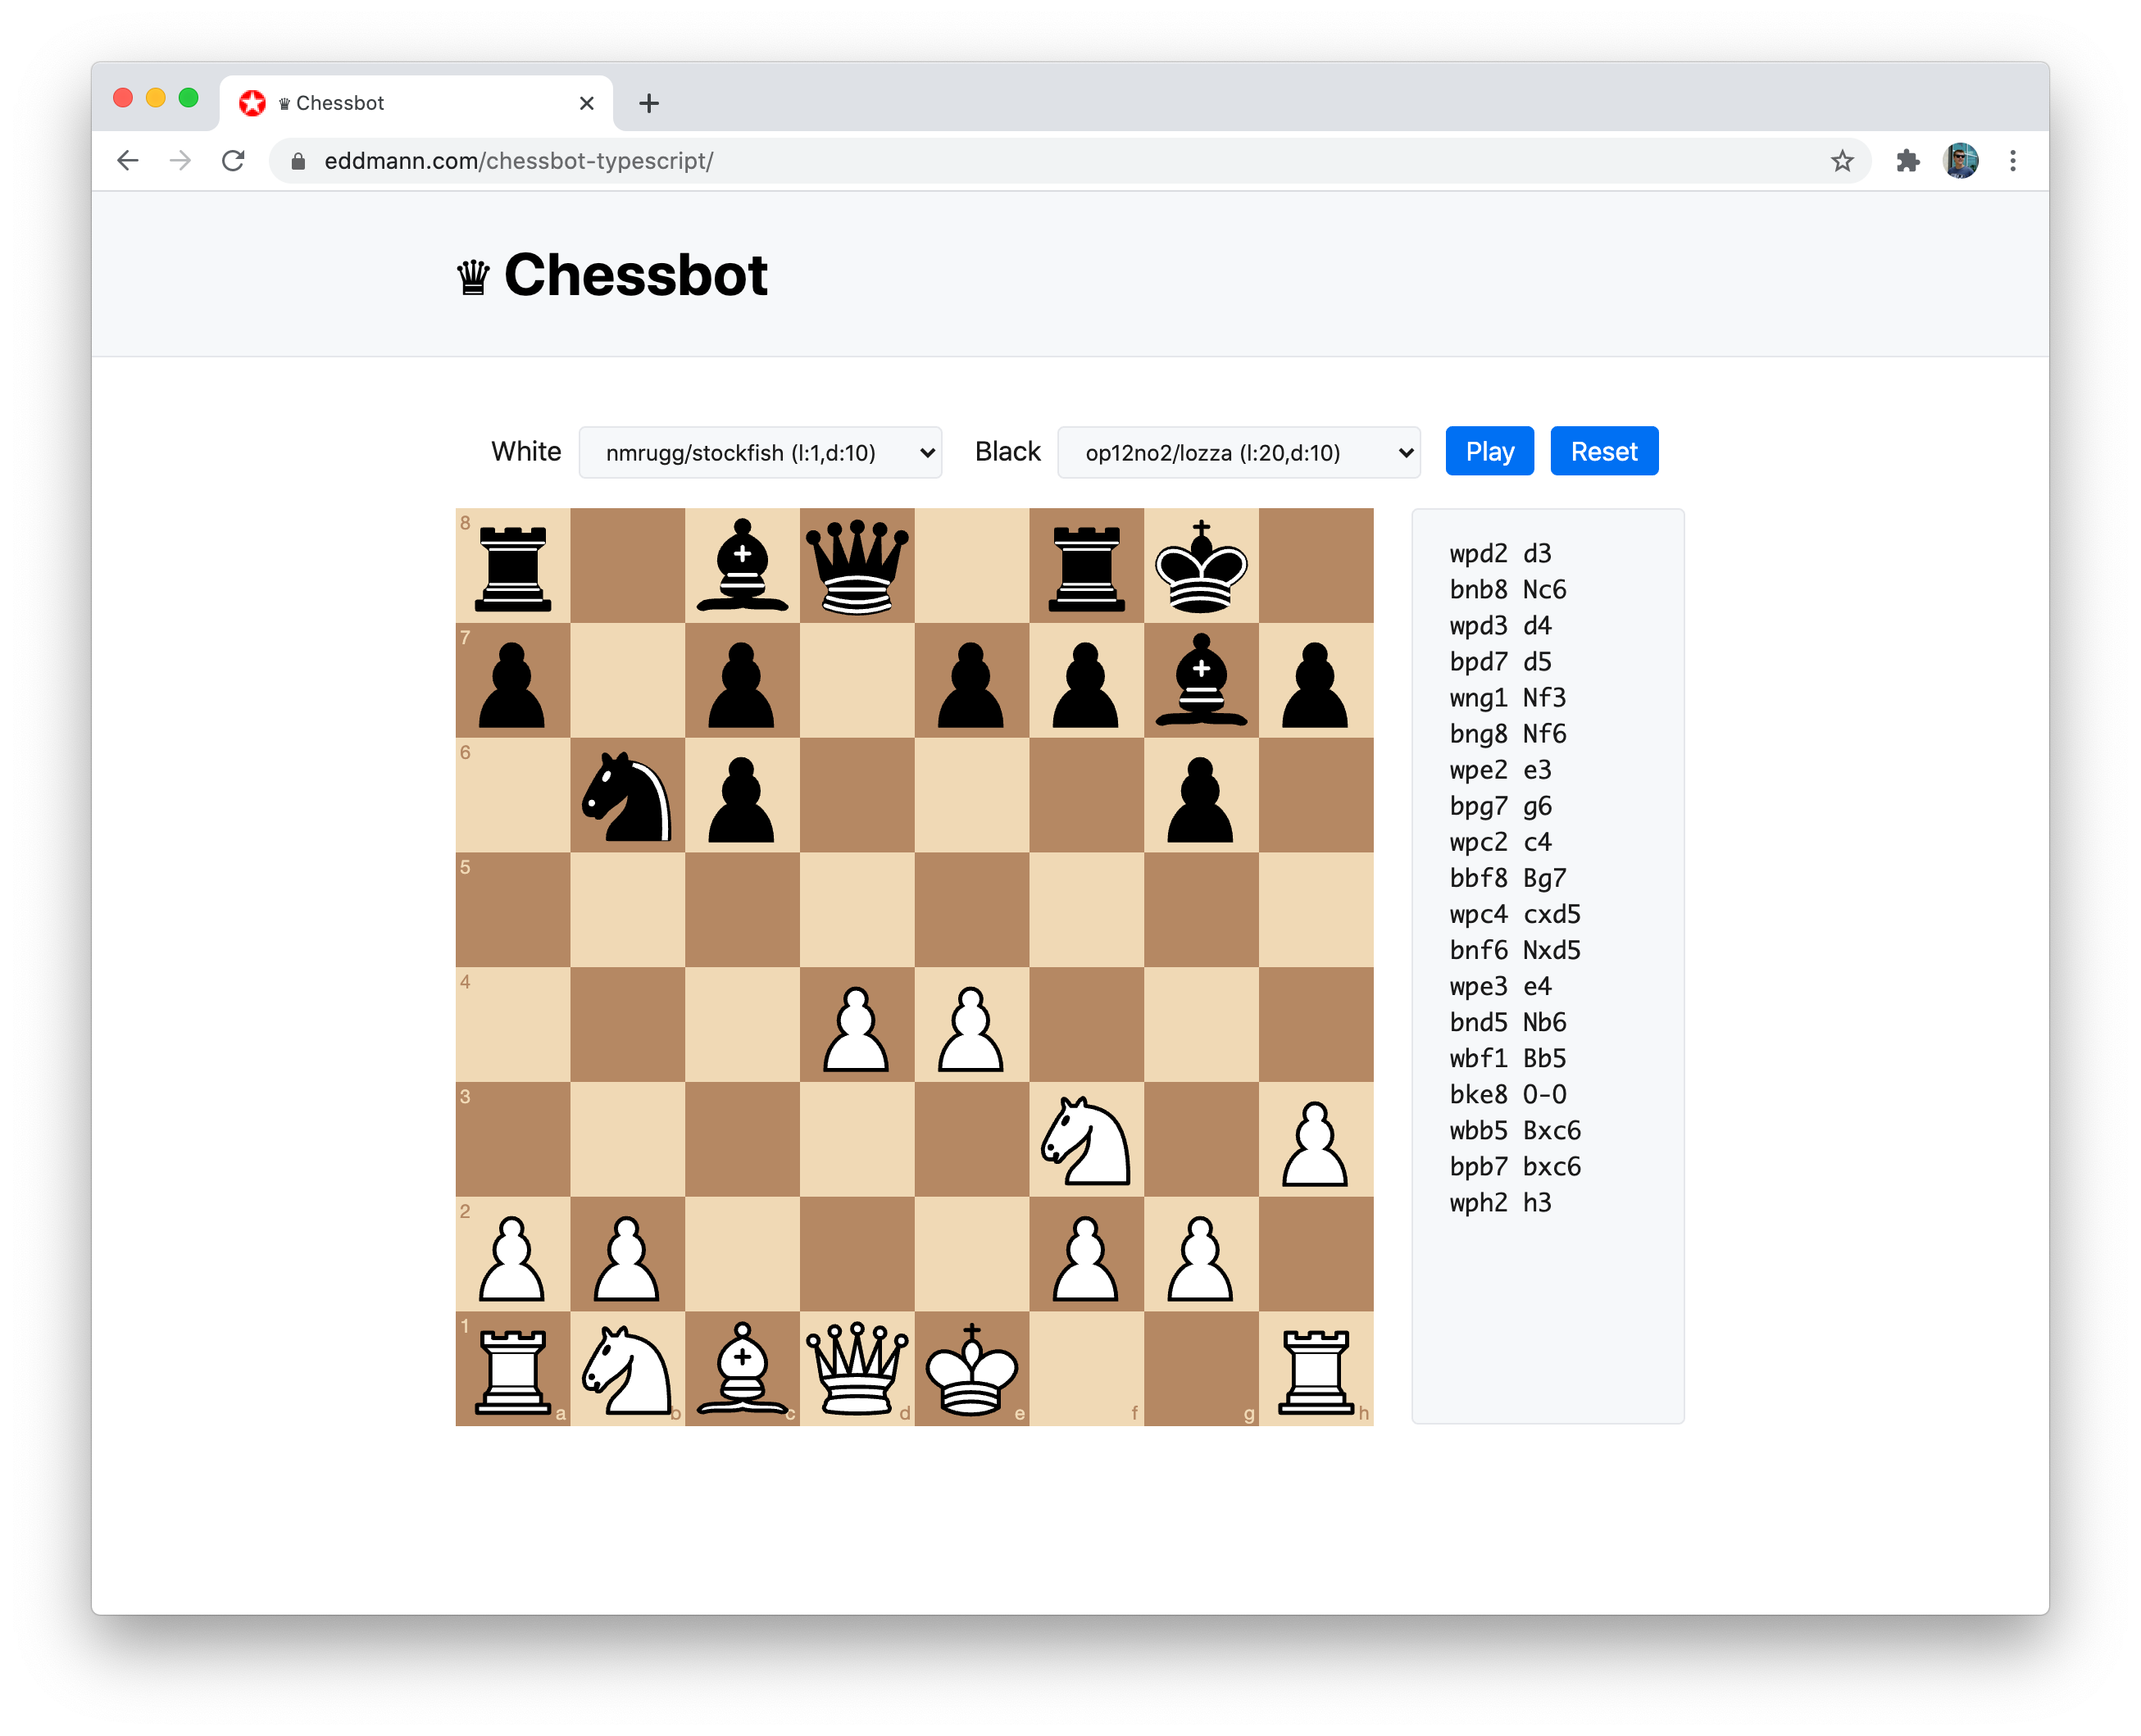 GitHub - tfmortie/simplechess: Simple chess game written in Python